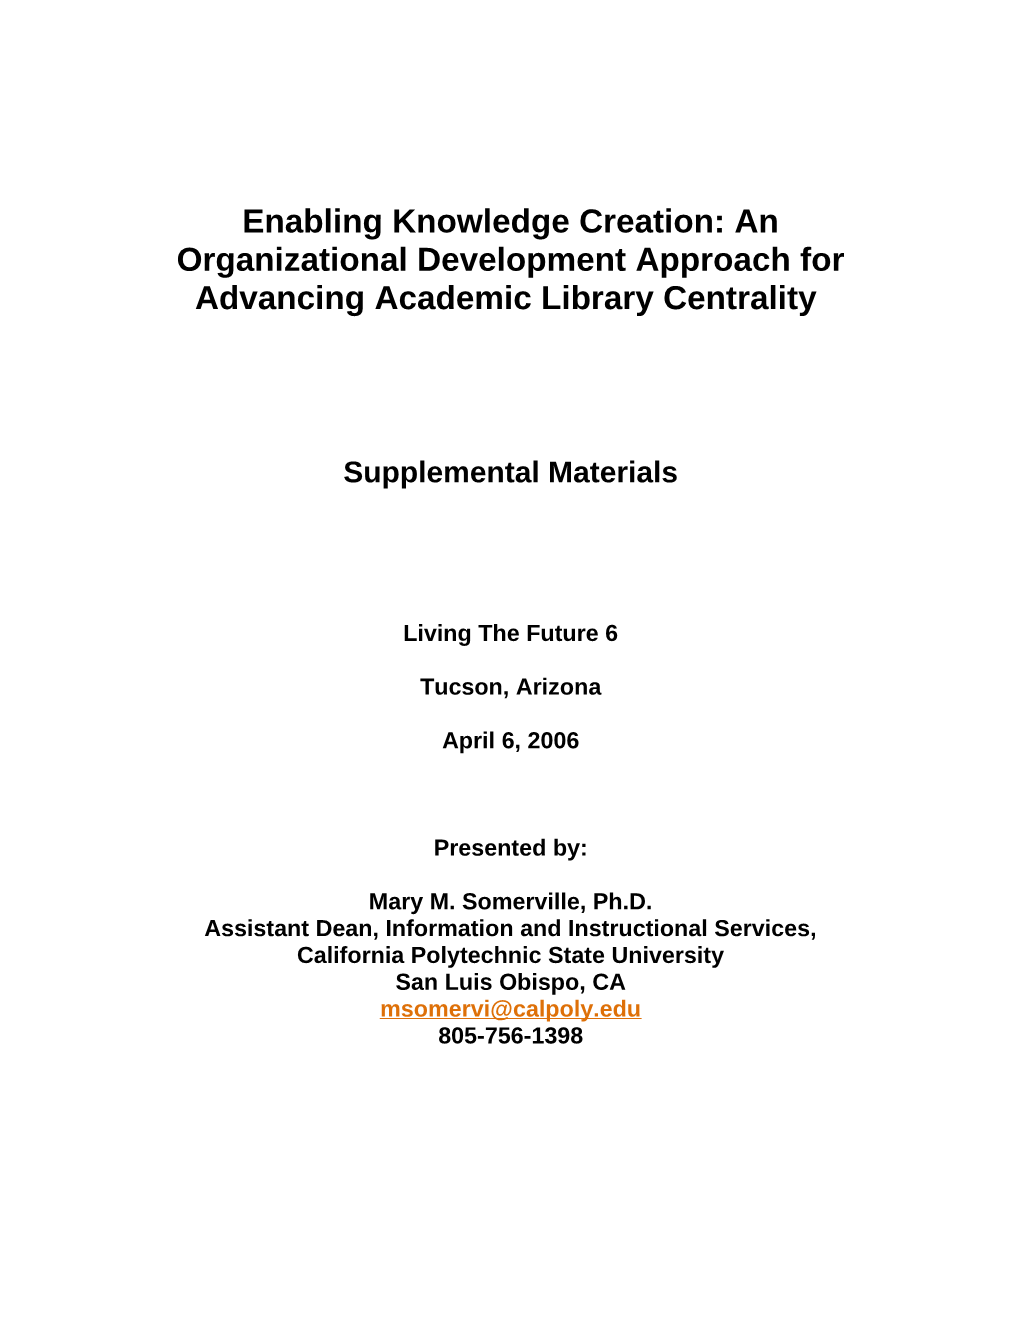 Enabling Knowledge Creation: an Organizational Development Approach for Advancing Academic